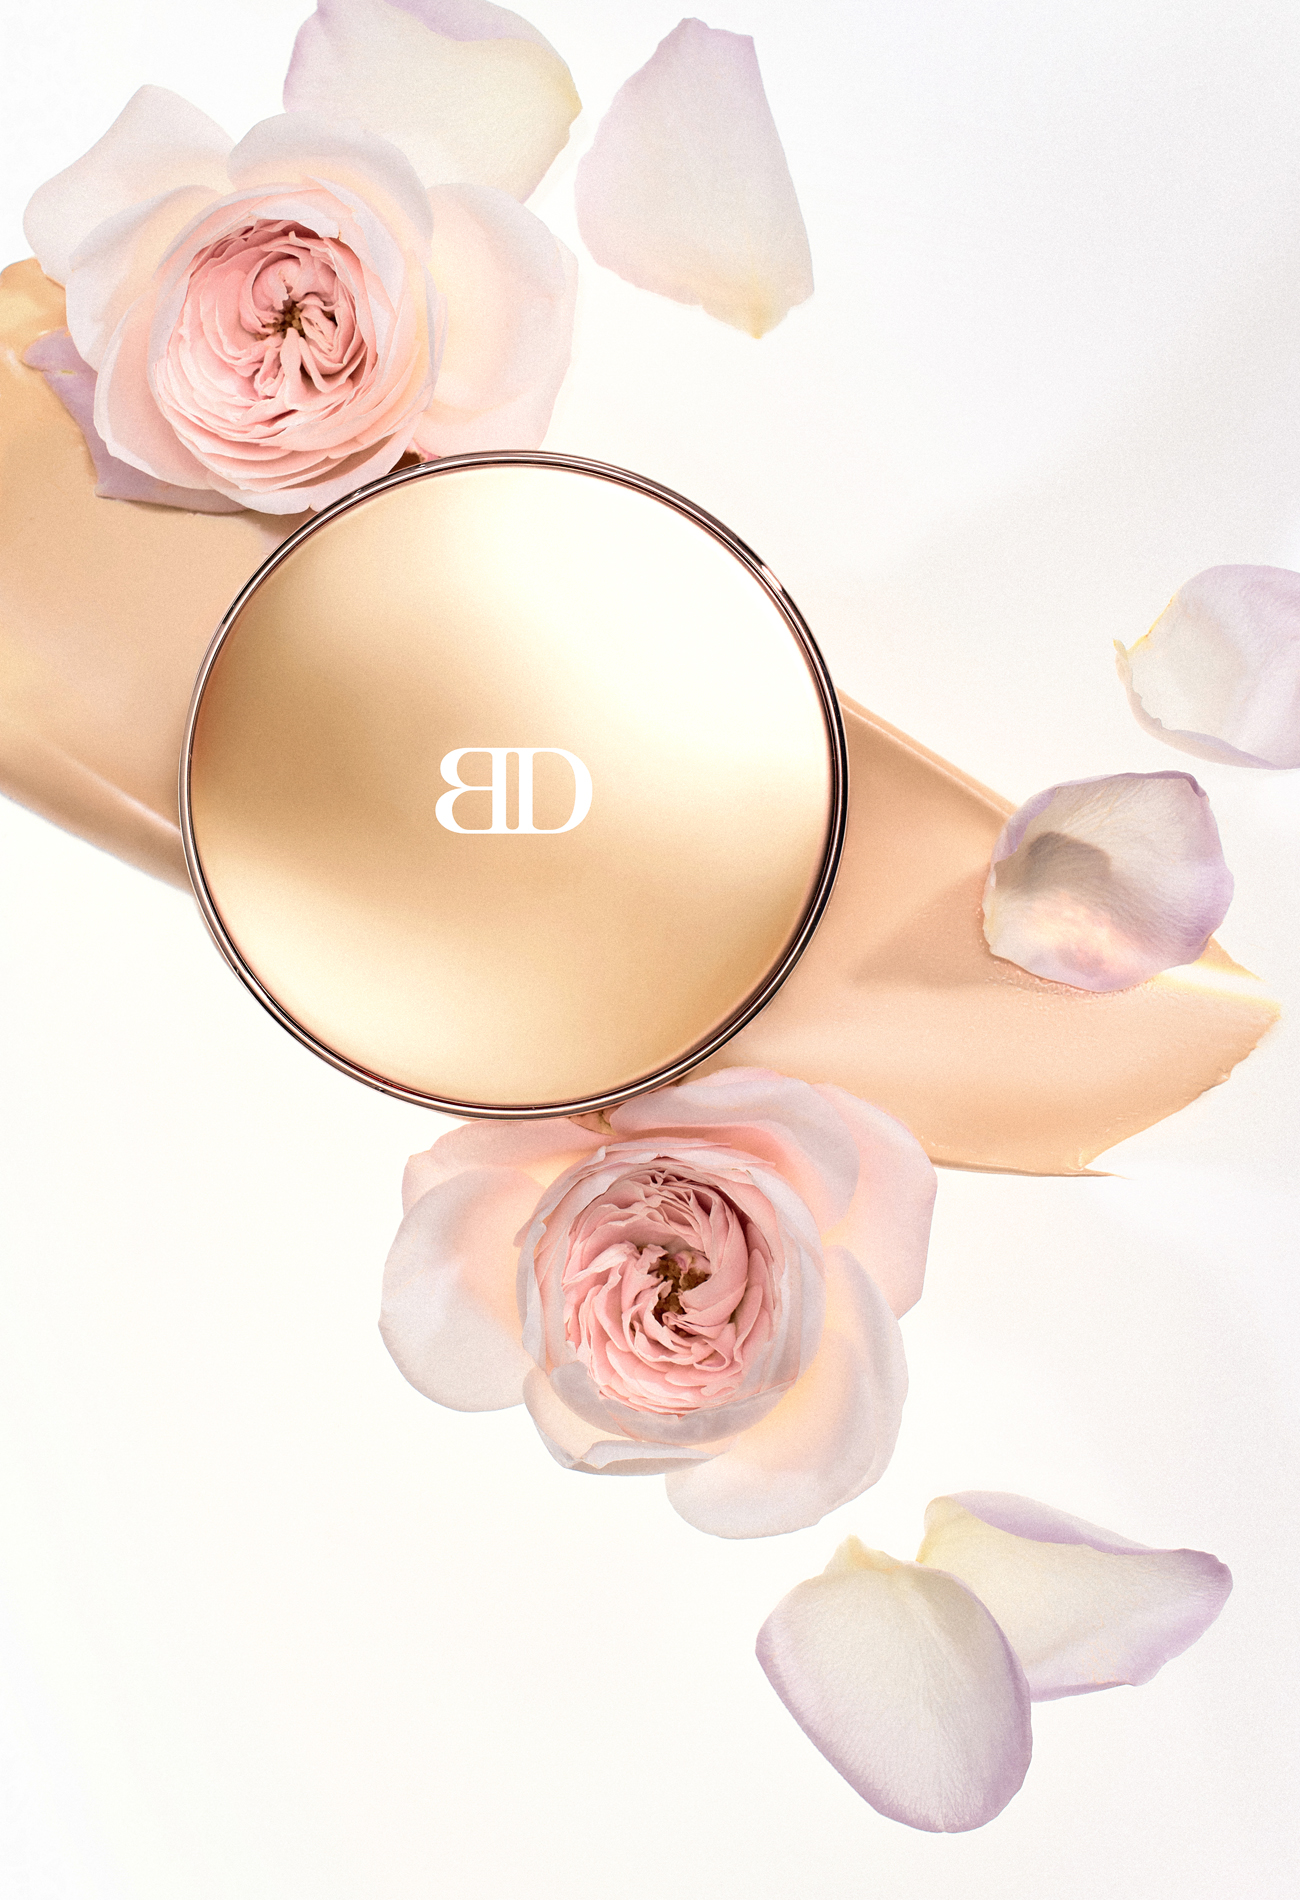 RADIANT AMPOULE CUSHION FOUNDATION "Gold Edition"